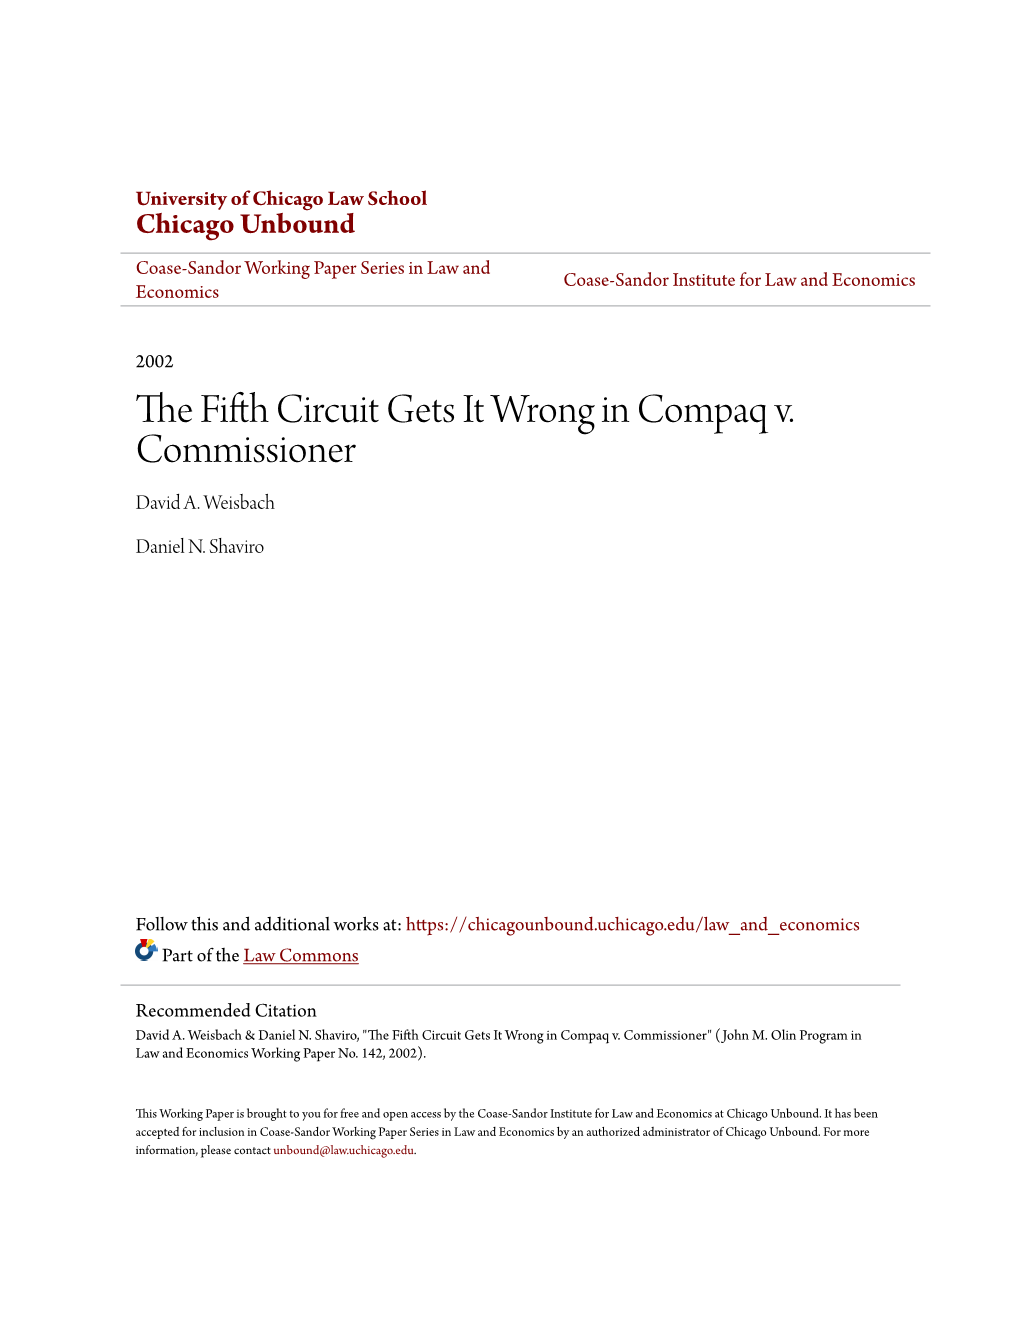 The Fifth Circuit Gets It Wrong in Compaq V. Commissioner